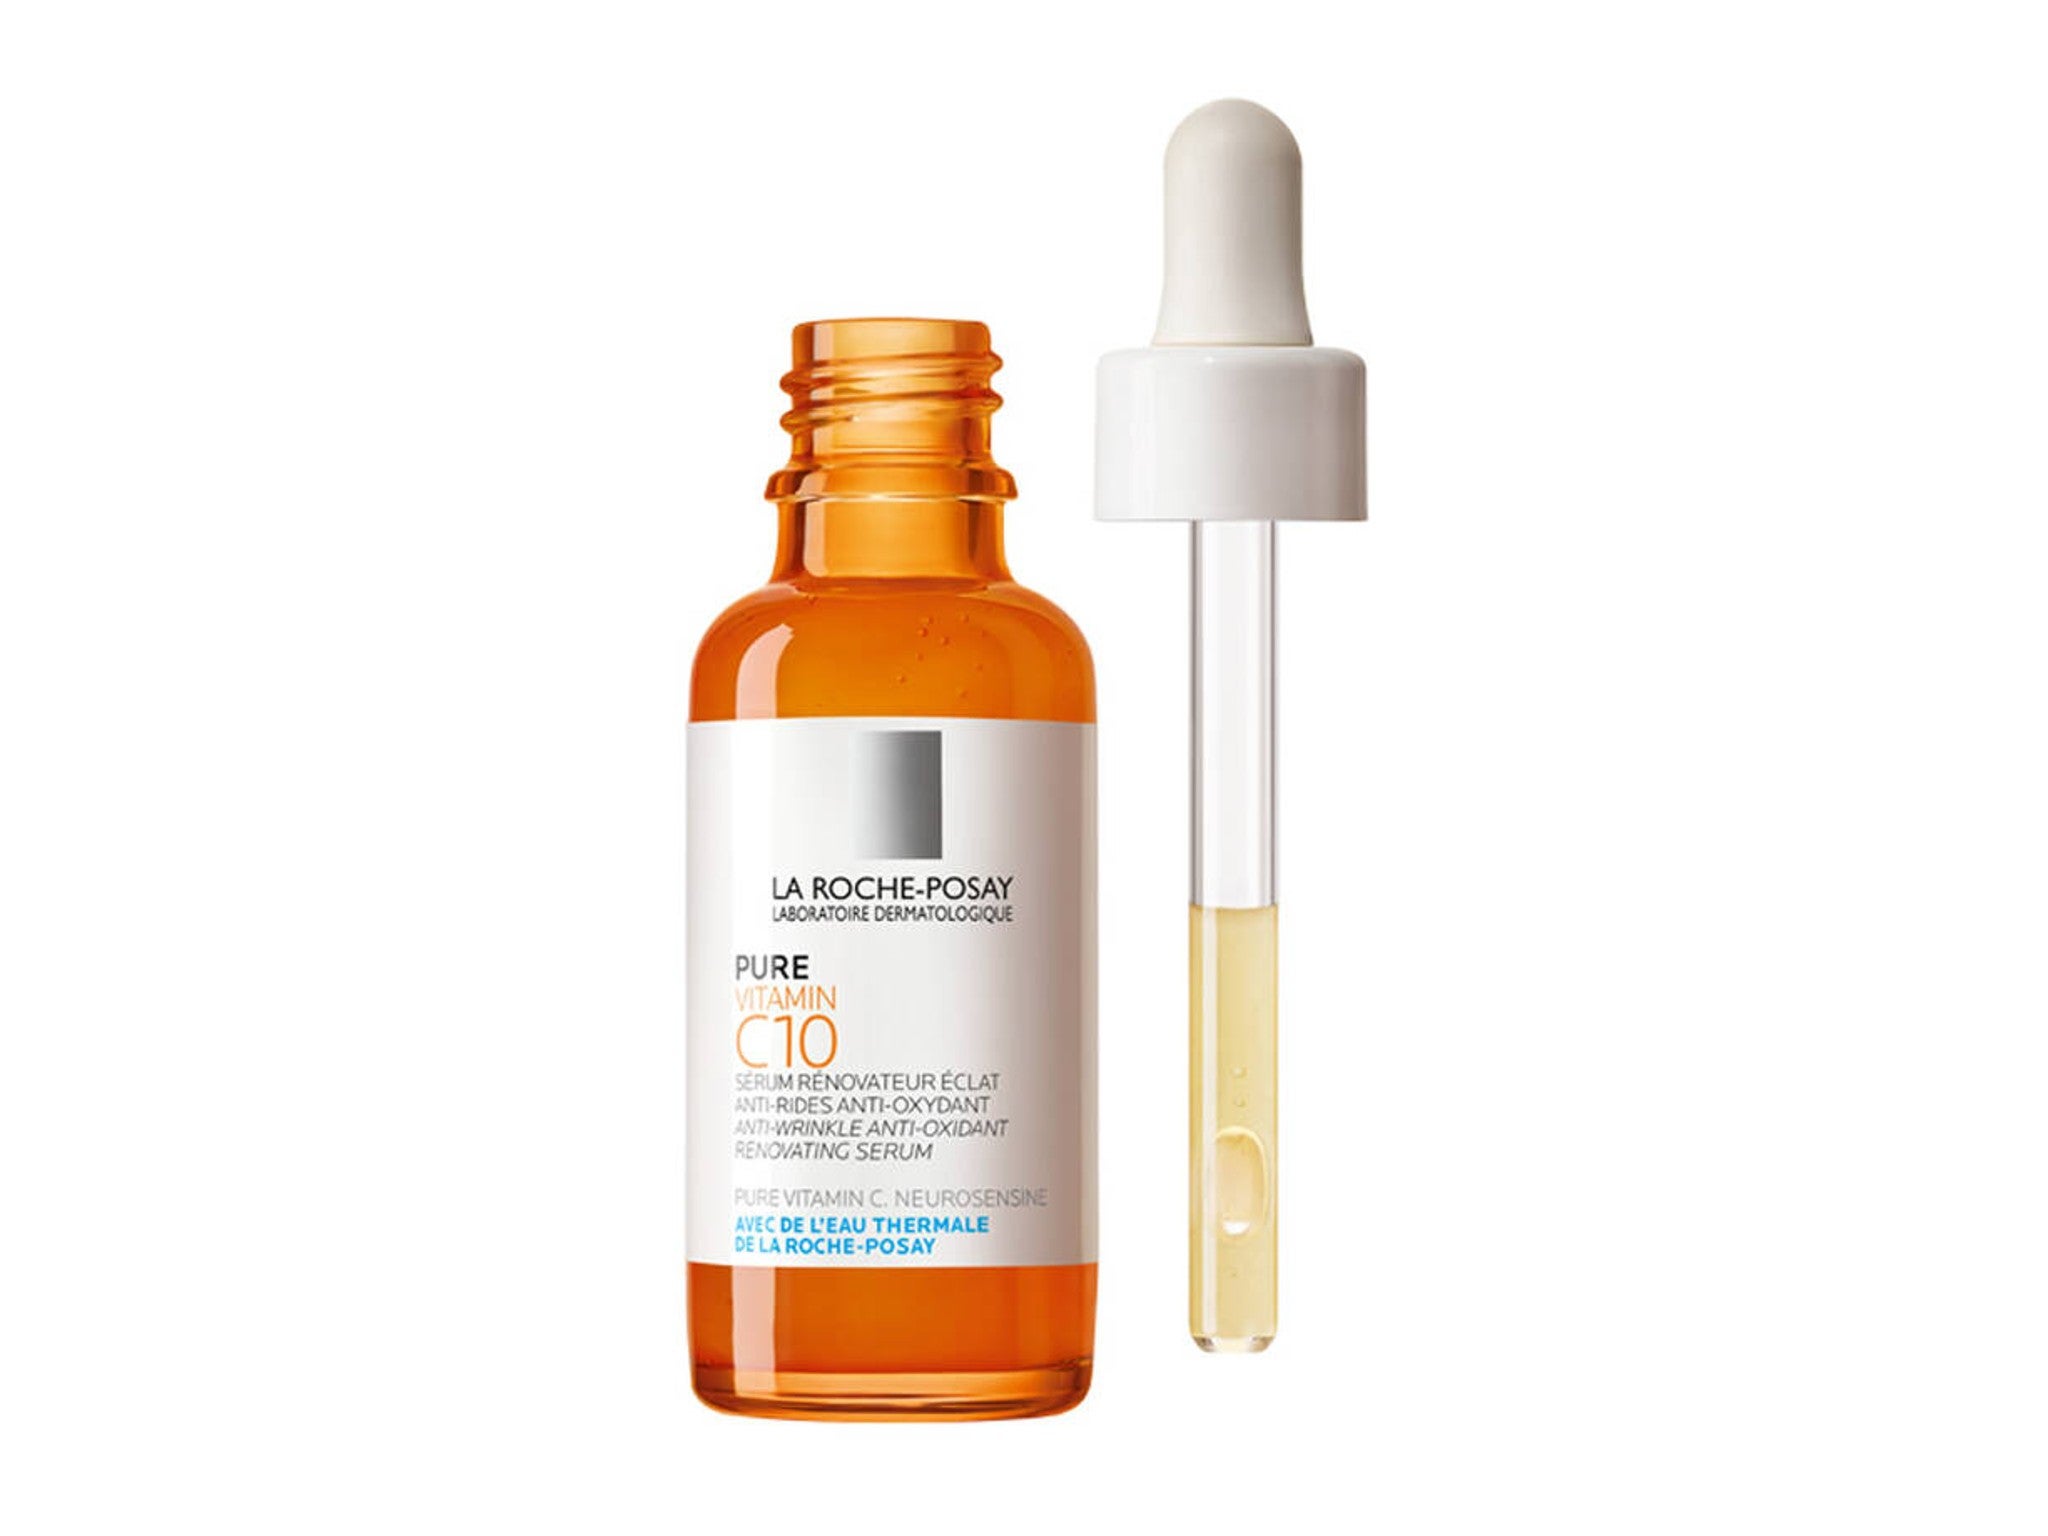 Created to target the appearance of fine lines and wrinkles, this serum contains 10 per cent pure vitamin C